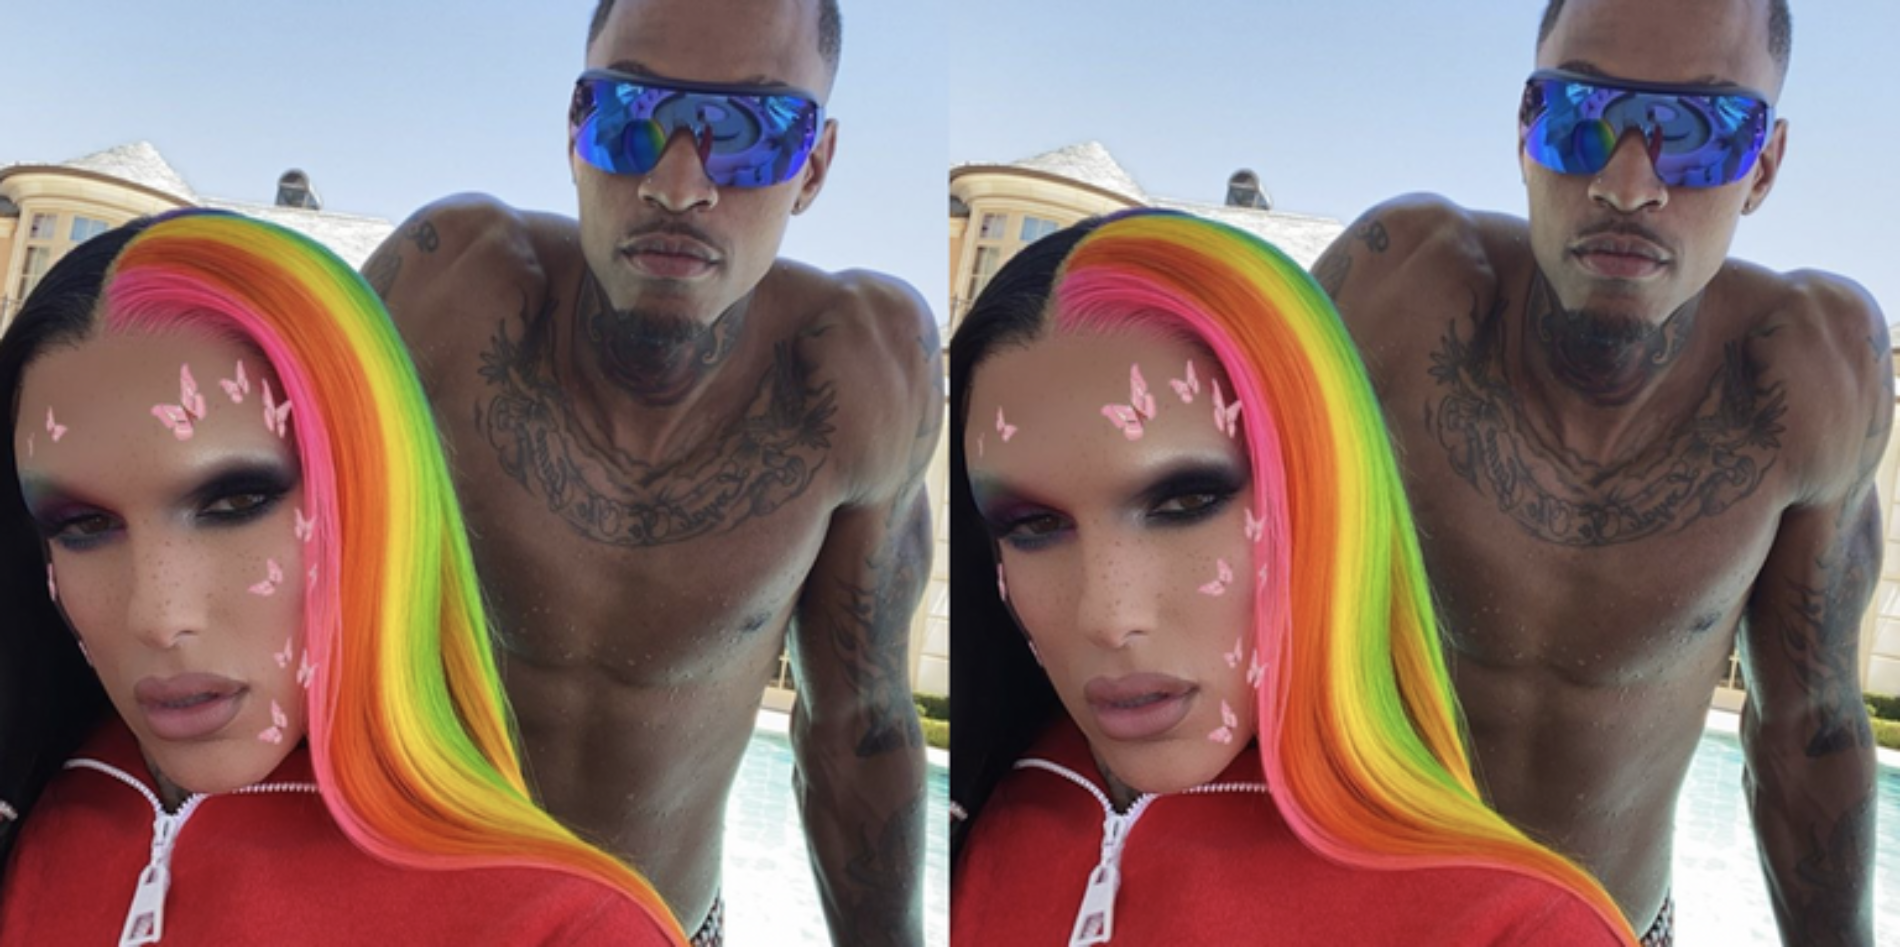 The Drama Surrounding Jeffree Star And His New Boyfriend Continues With Accusations Of Cheating and Homophobia